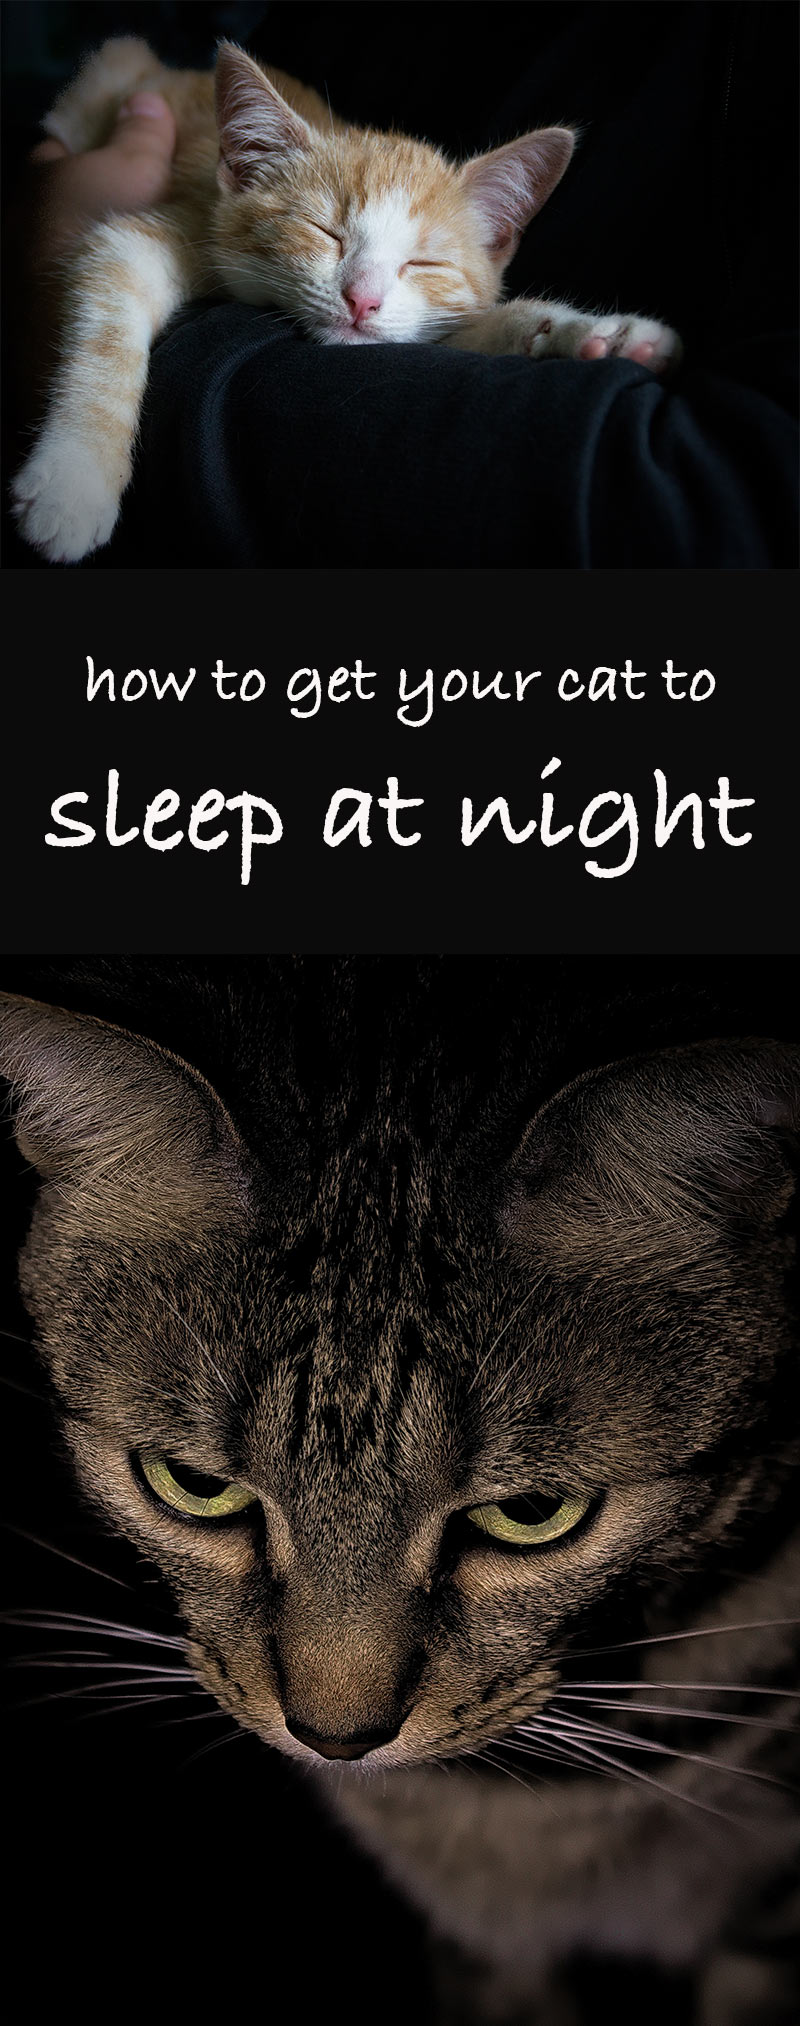 cats are not nocturnal